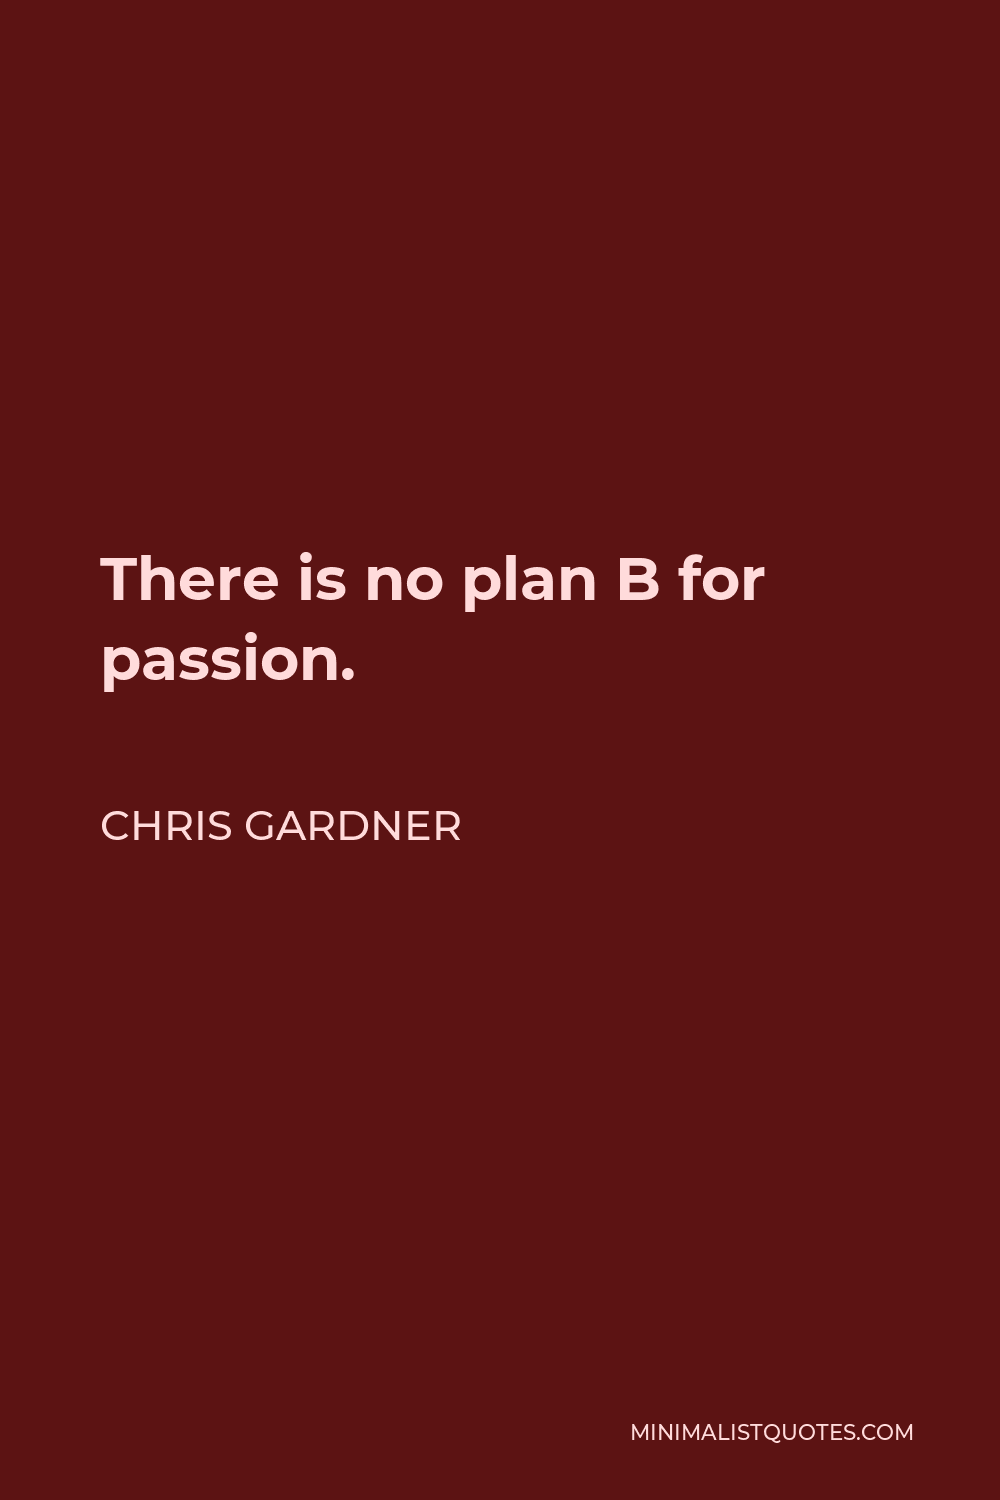 Chris Gardner Quote - There is no plan B for passion.